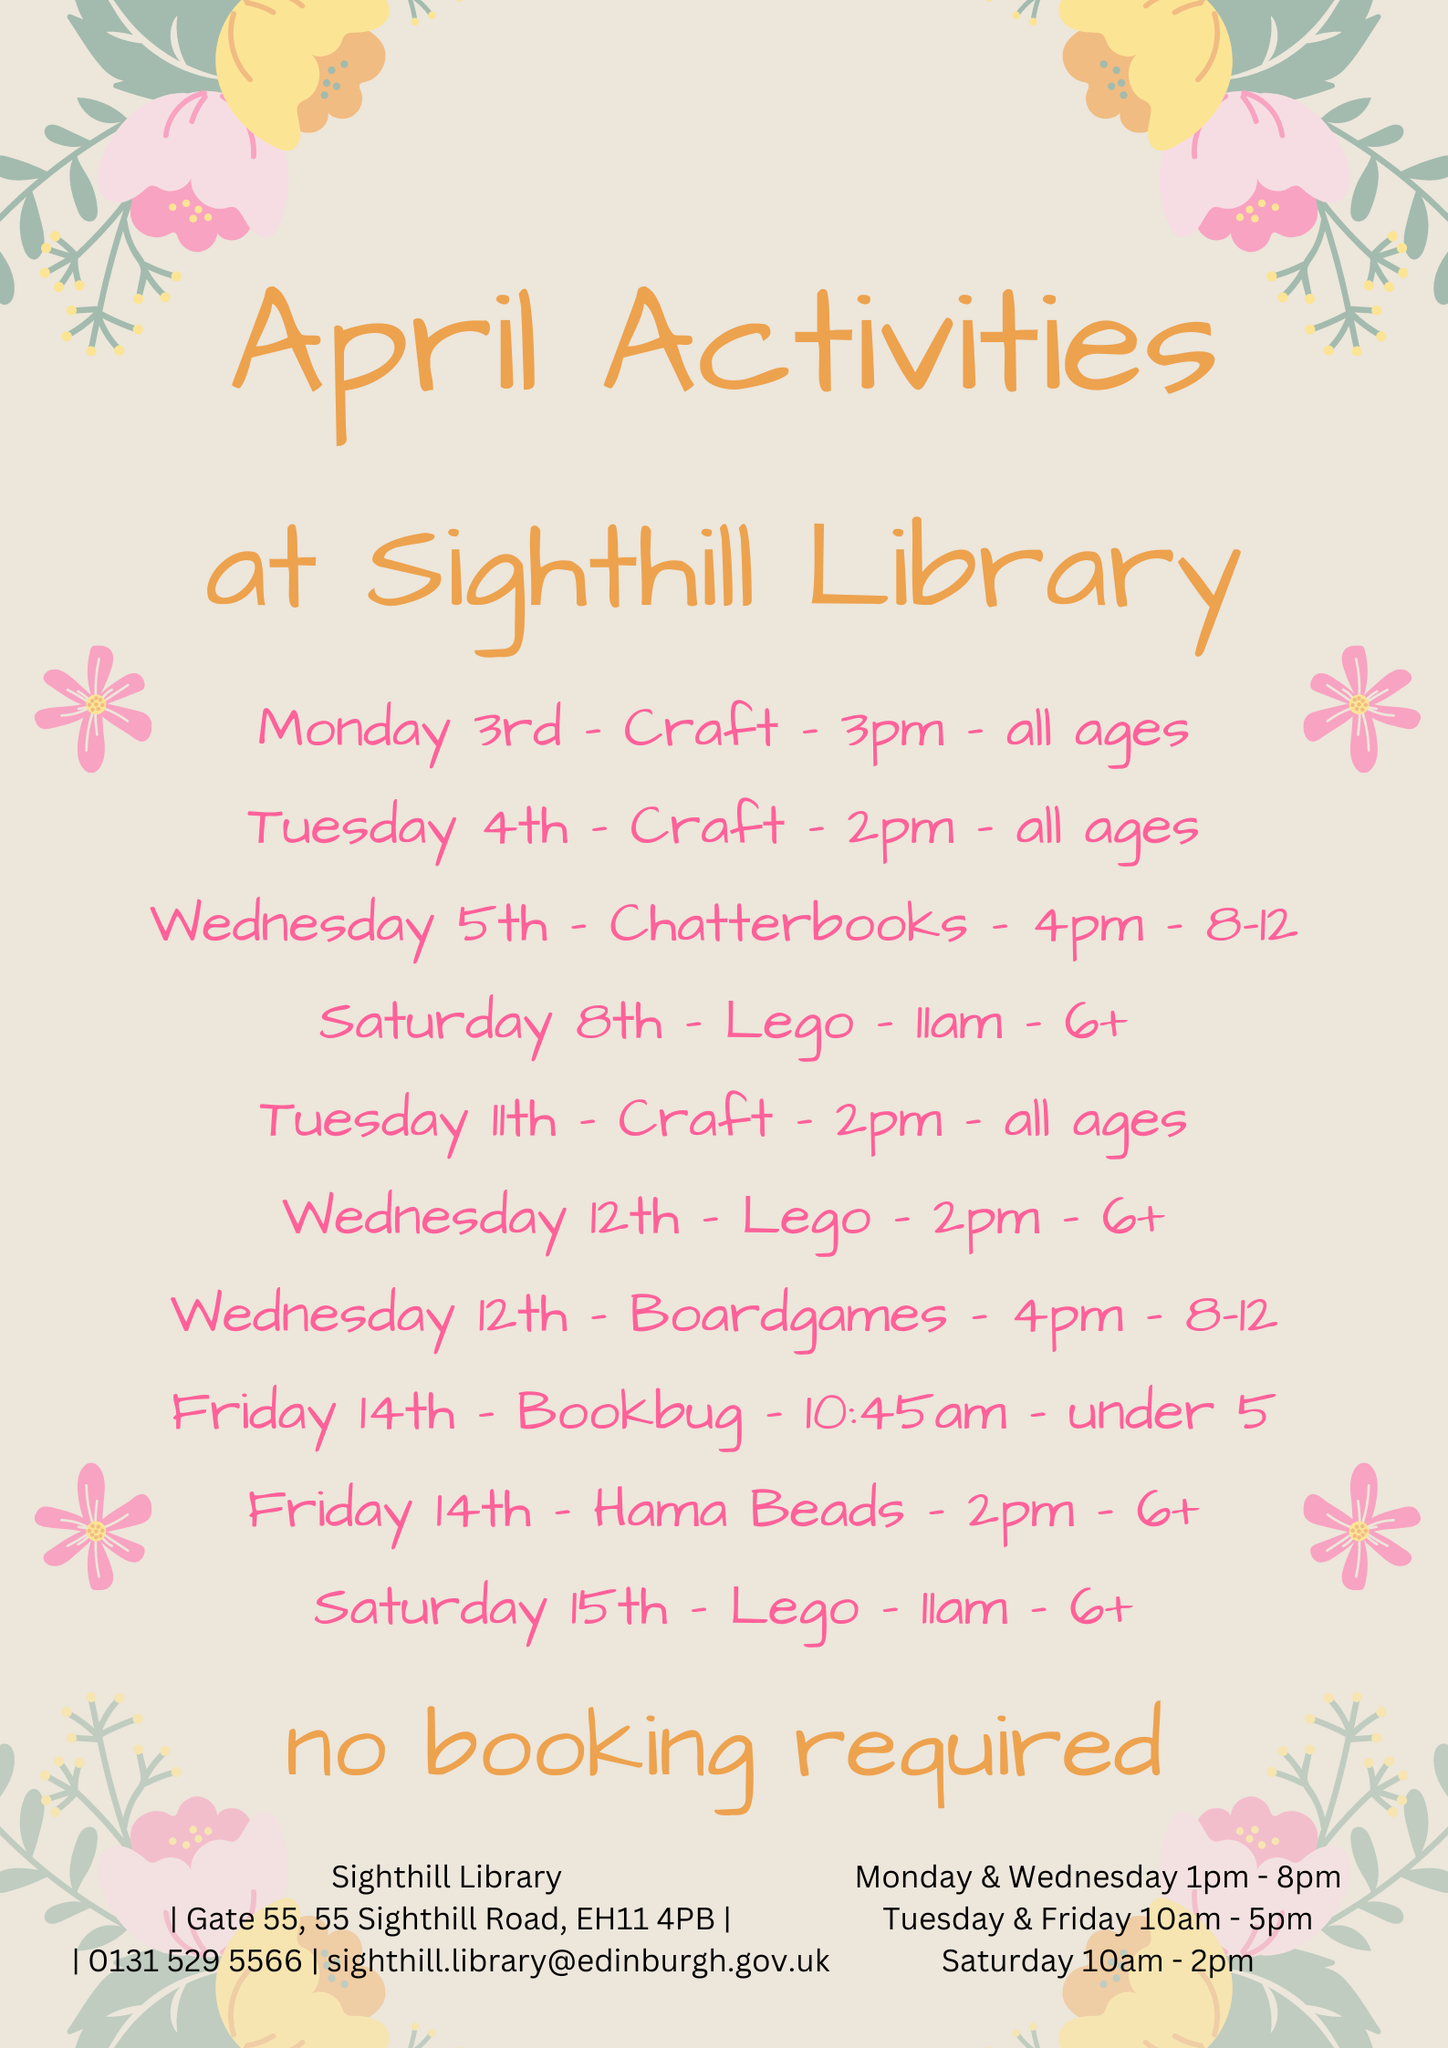 Easter at Sighthill Library Featured Image